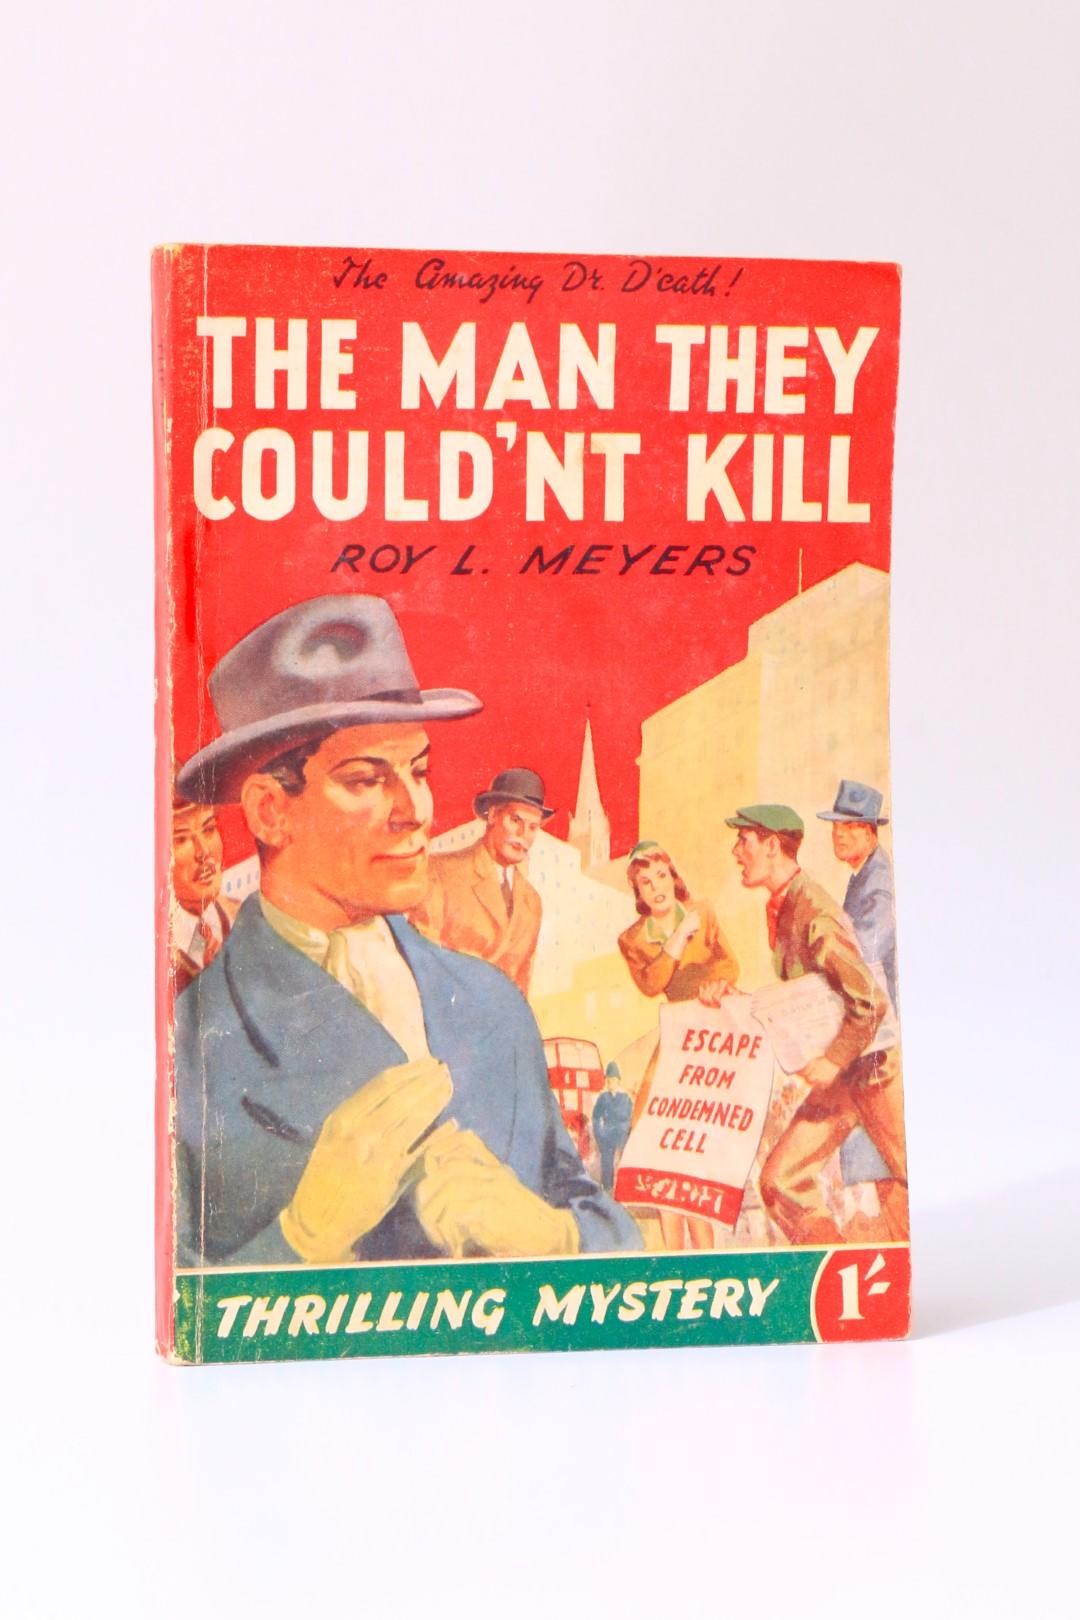 Roy L. Meyers - The Man They Couldn't Kill - Fiction House Ltd, 1944, First Edition.